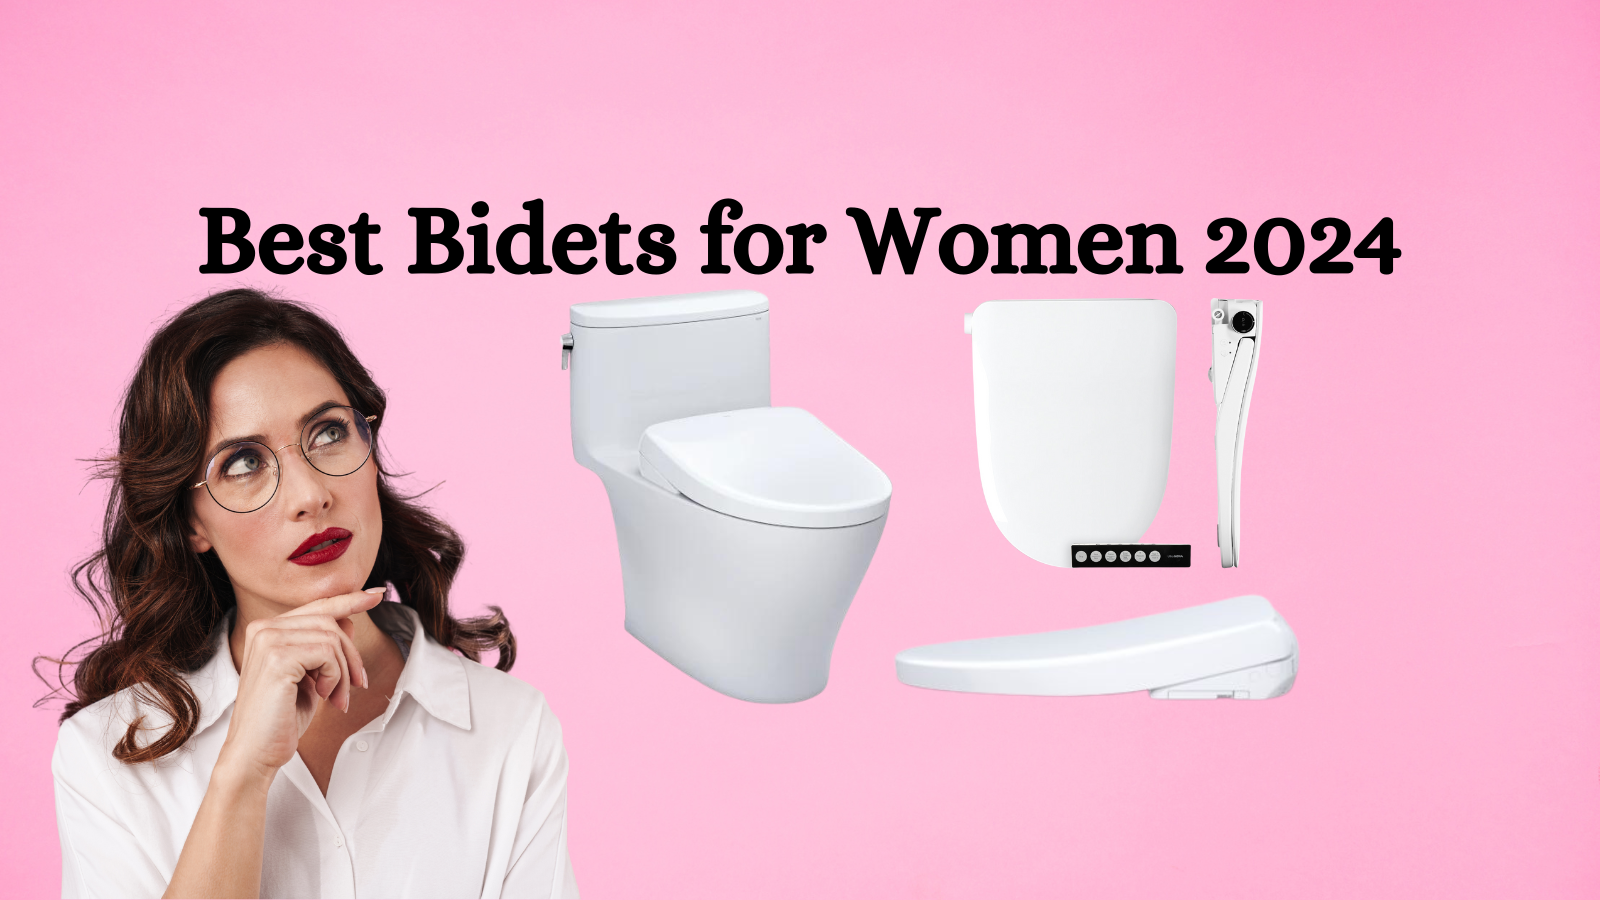 best bidets for women bidet toilet combo and bidet seats with woman deciding which one to choose